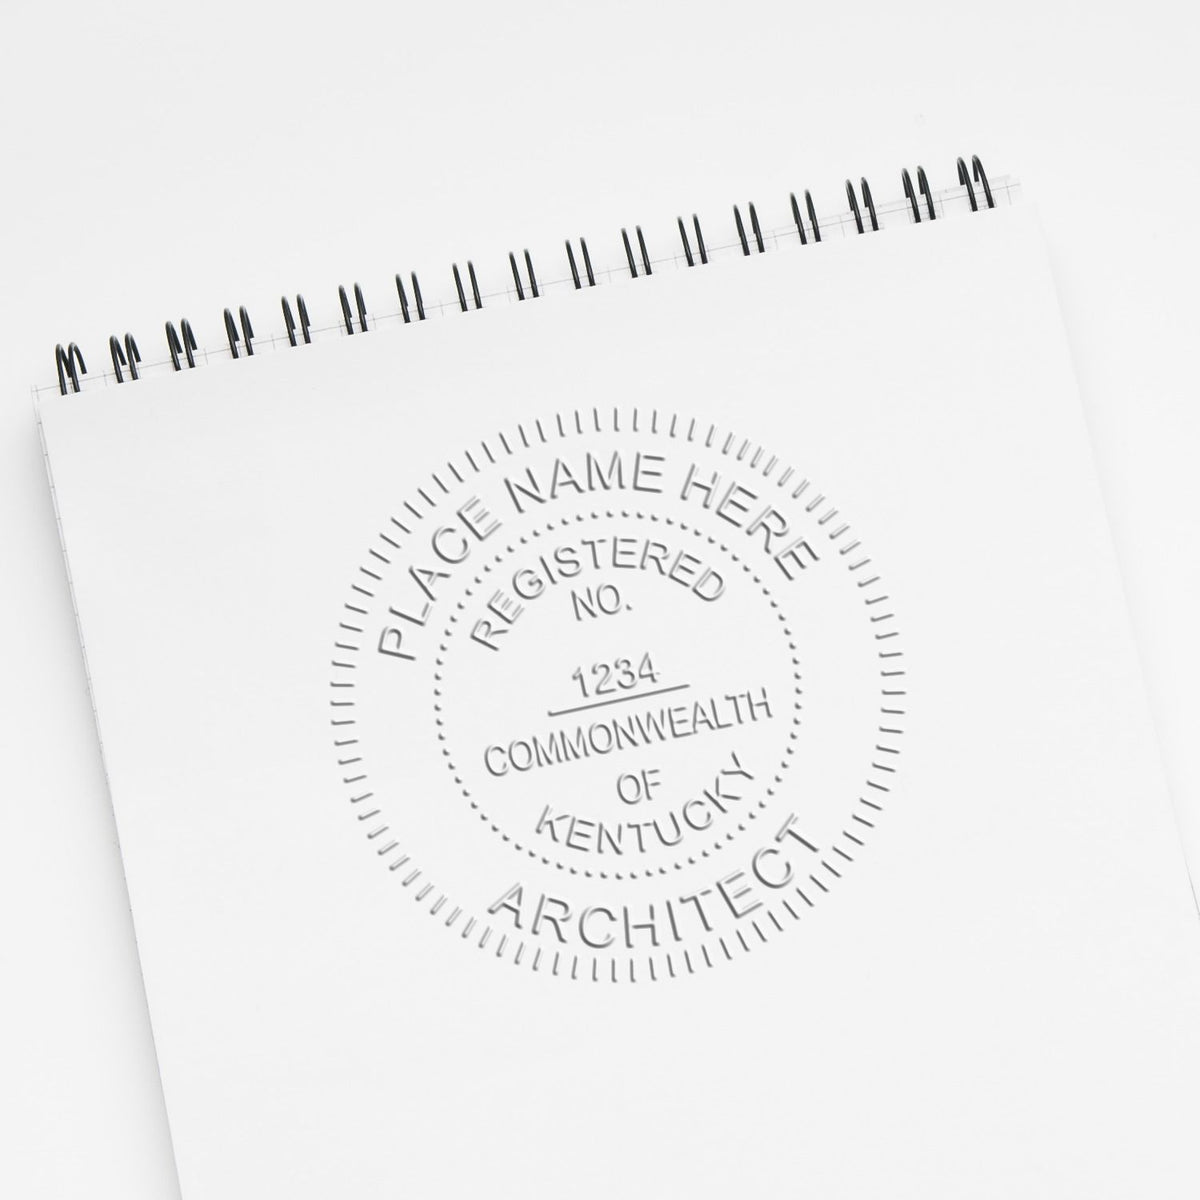 An alternative view of the Hybrid Kentucky Architect Seal stamped on a sheet of paper showing the image in use